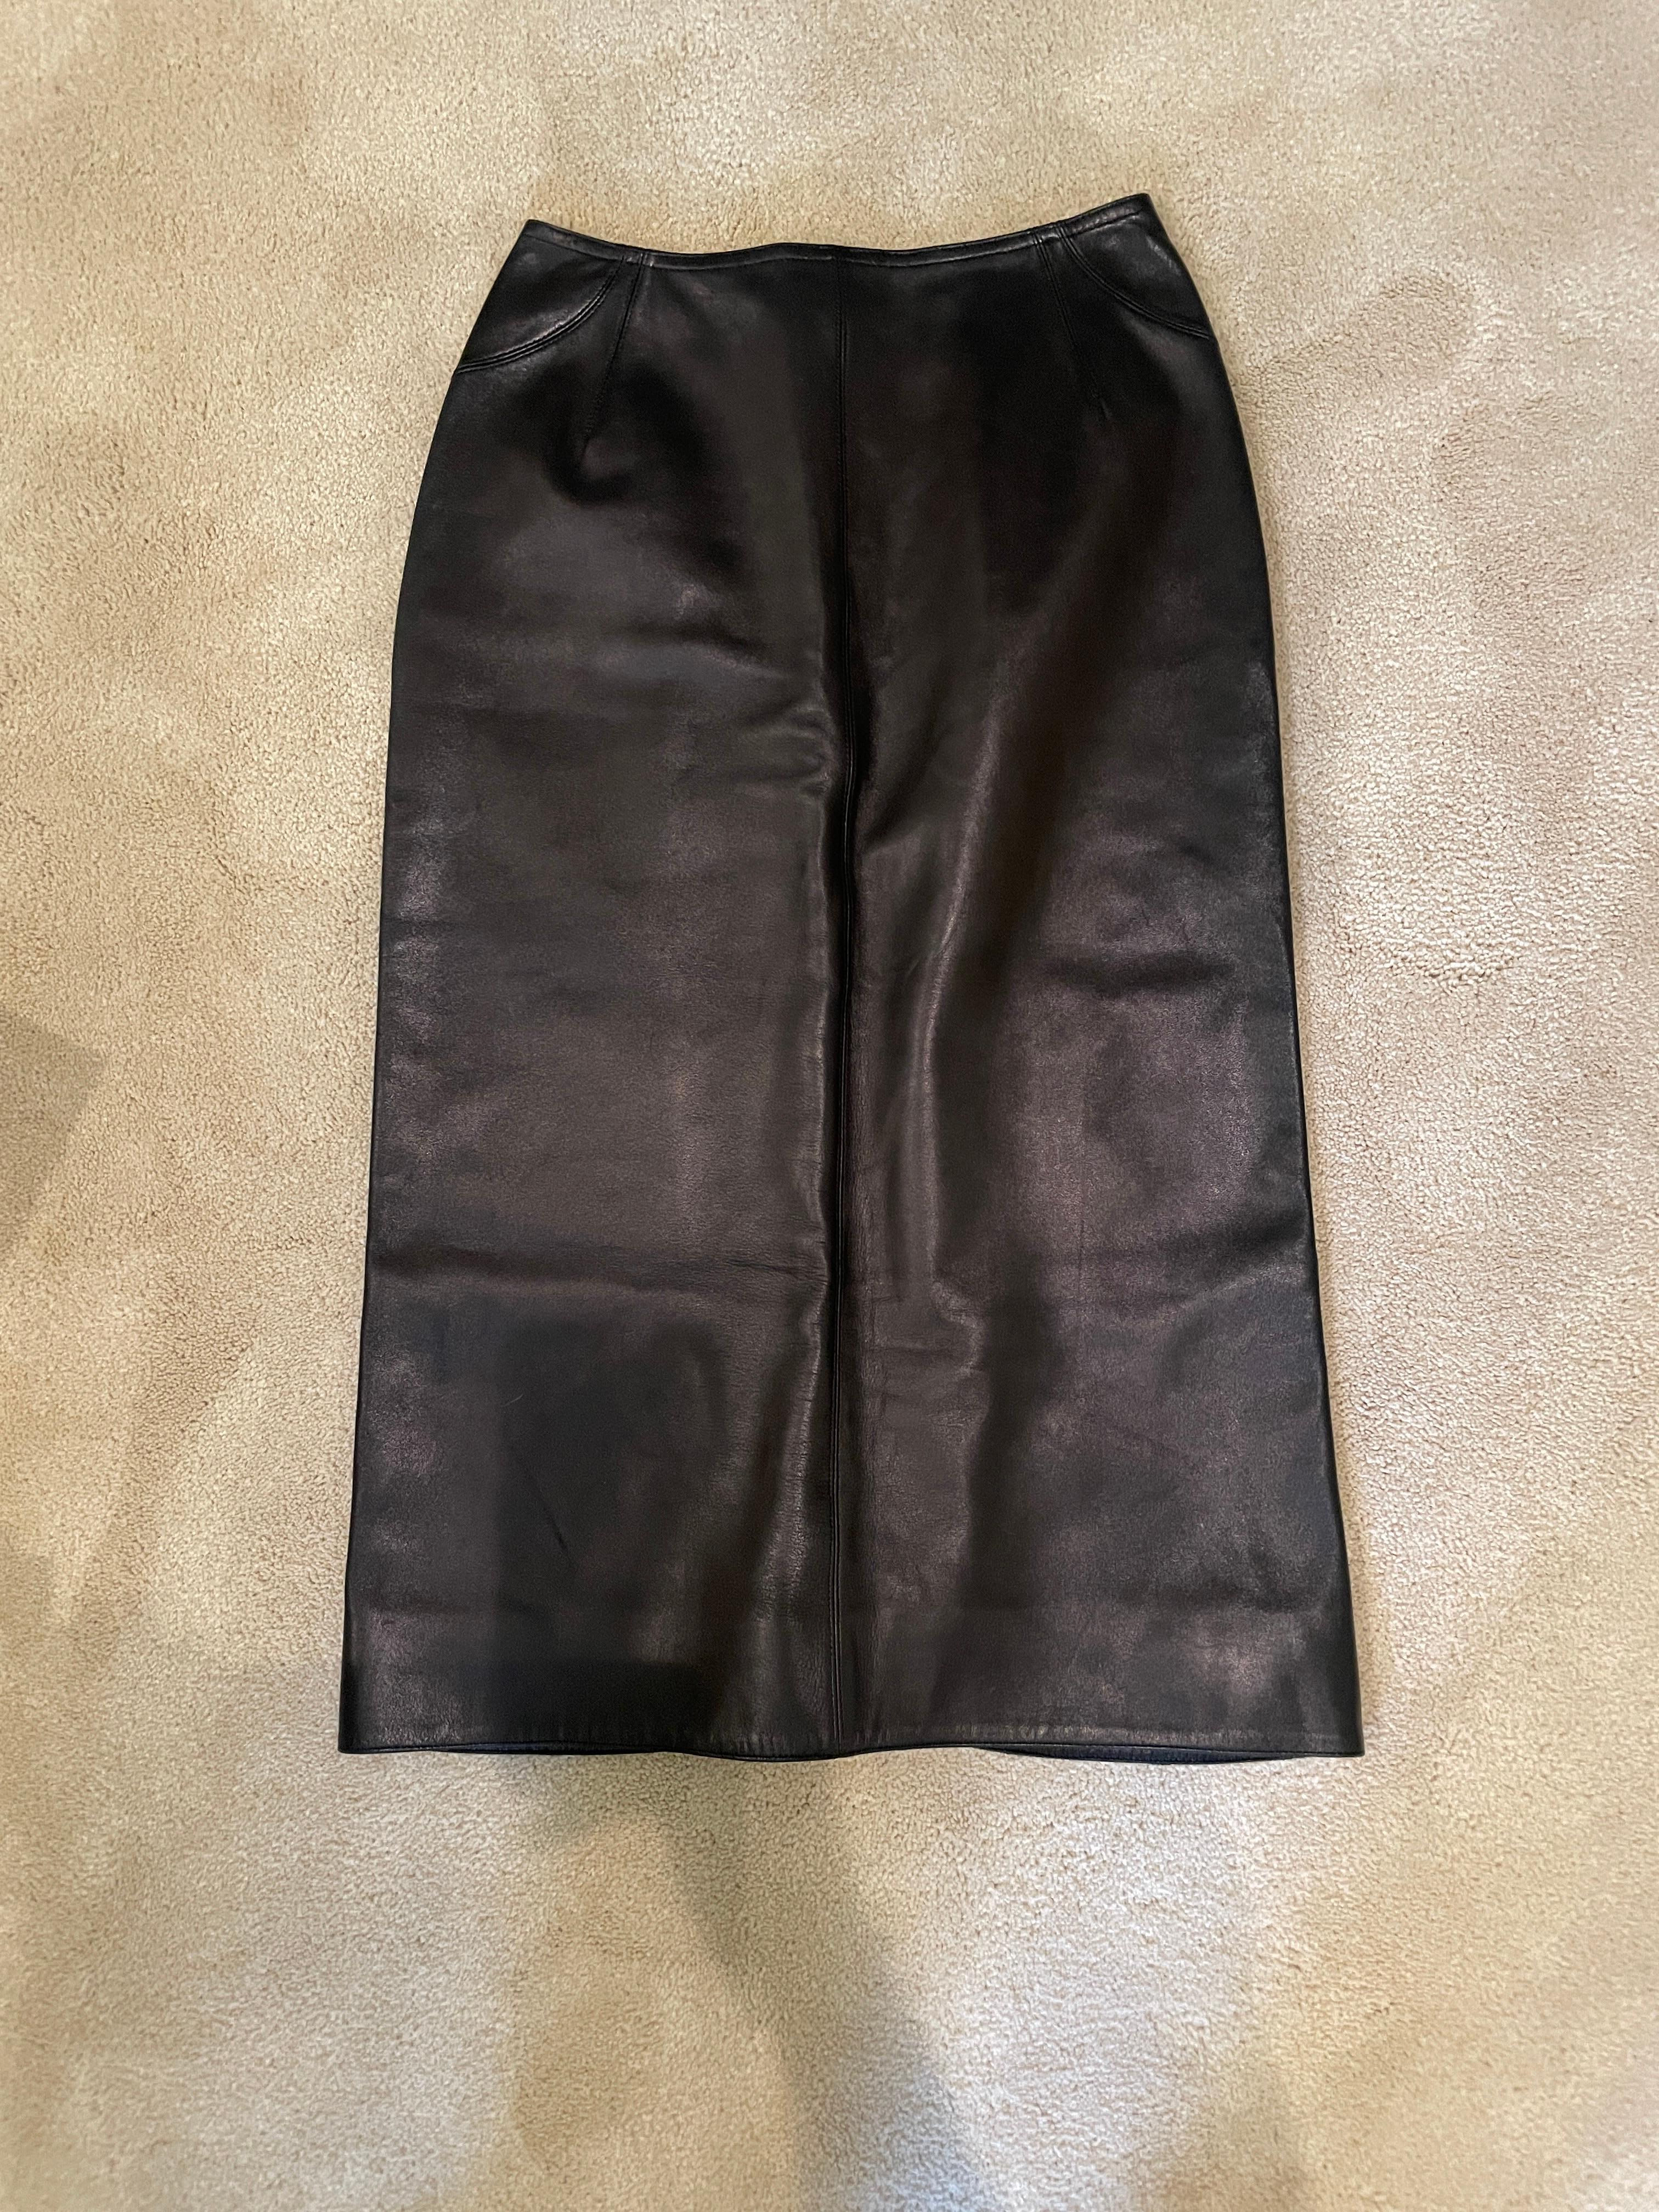 ALAIA black leather skirt, not vintage, est 2019, in pristine condition, so soft, jet black leather. High waist fit and super tight. SEXY with a cropped sweater or actually anything. F38, measures 12